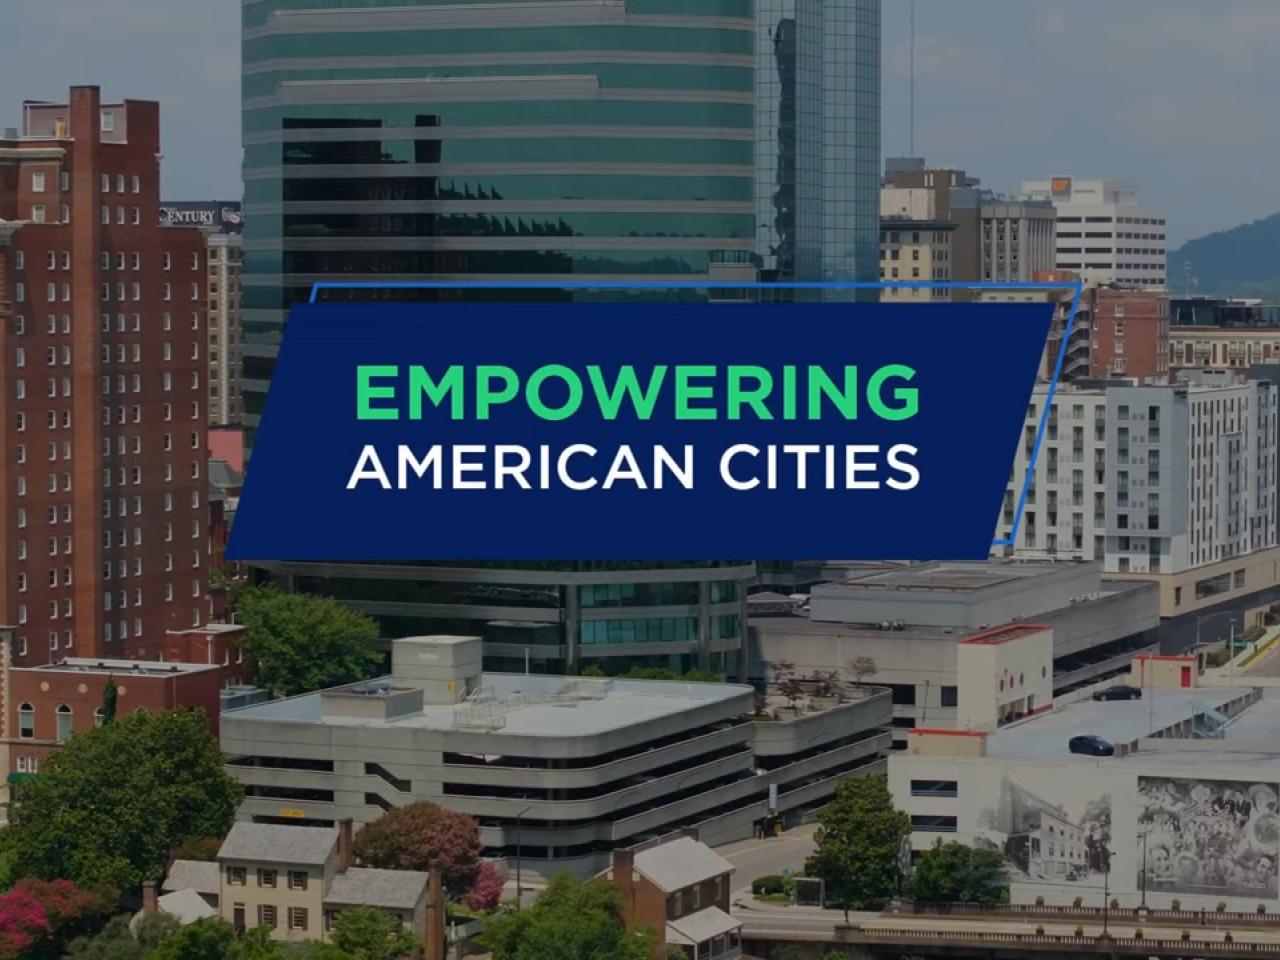 Empowering American Cities, with City background